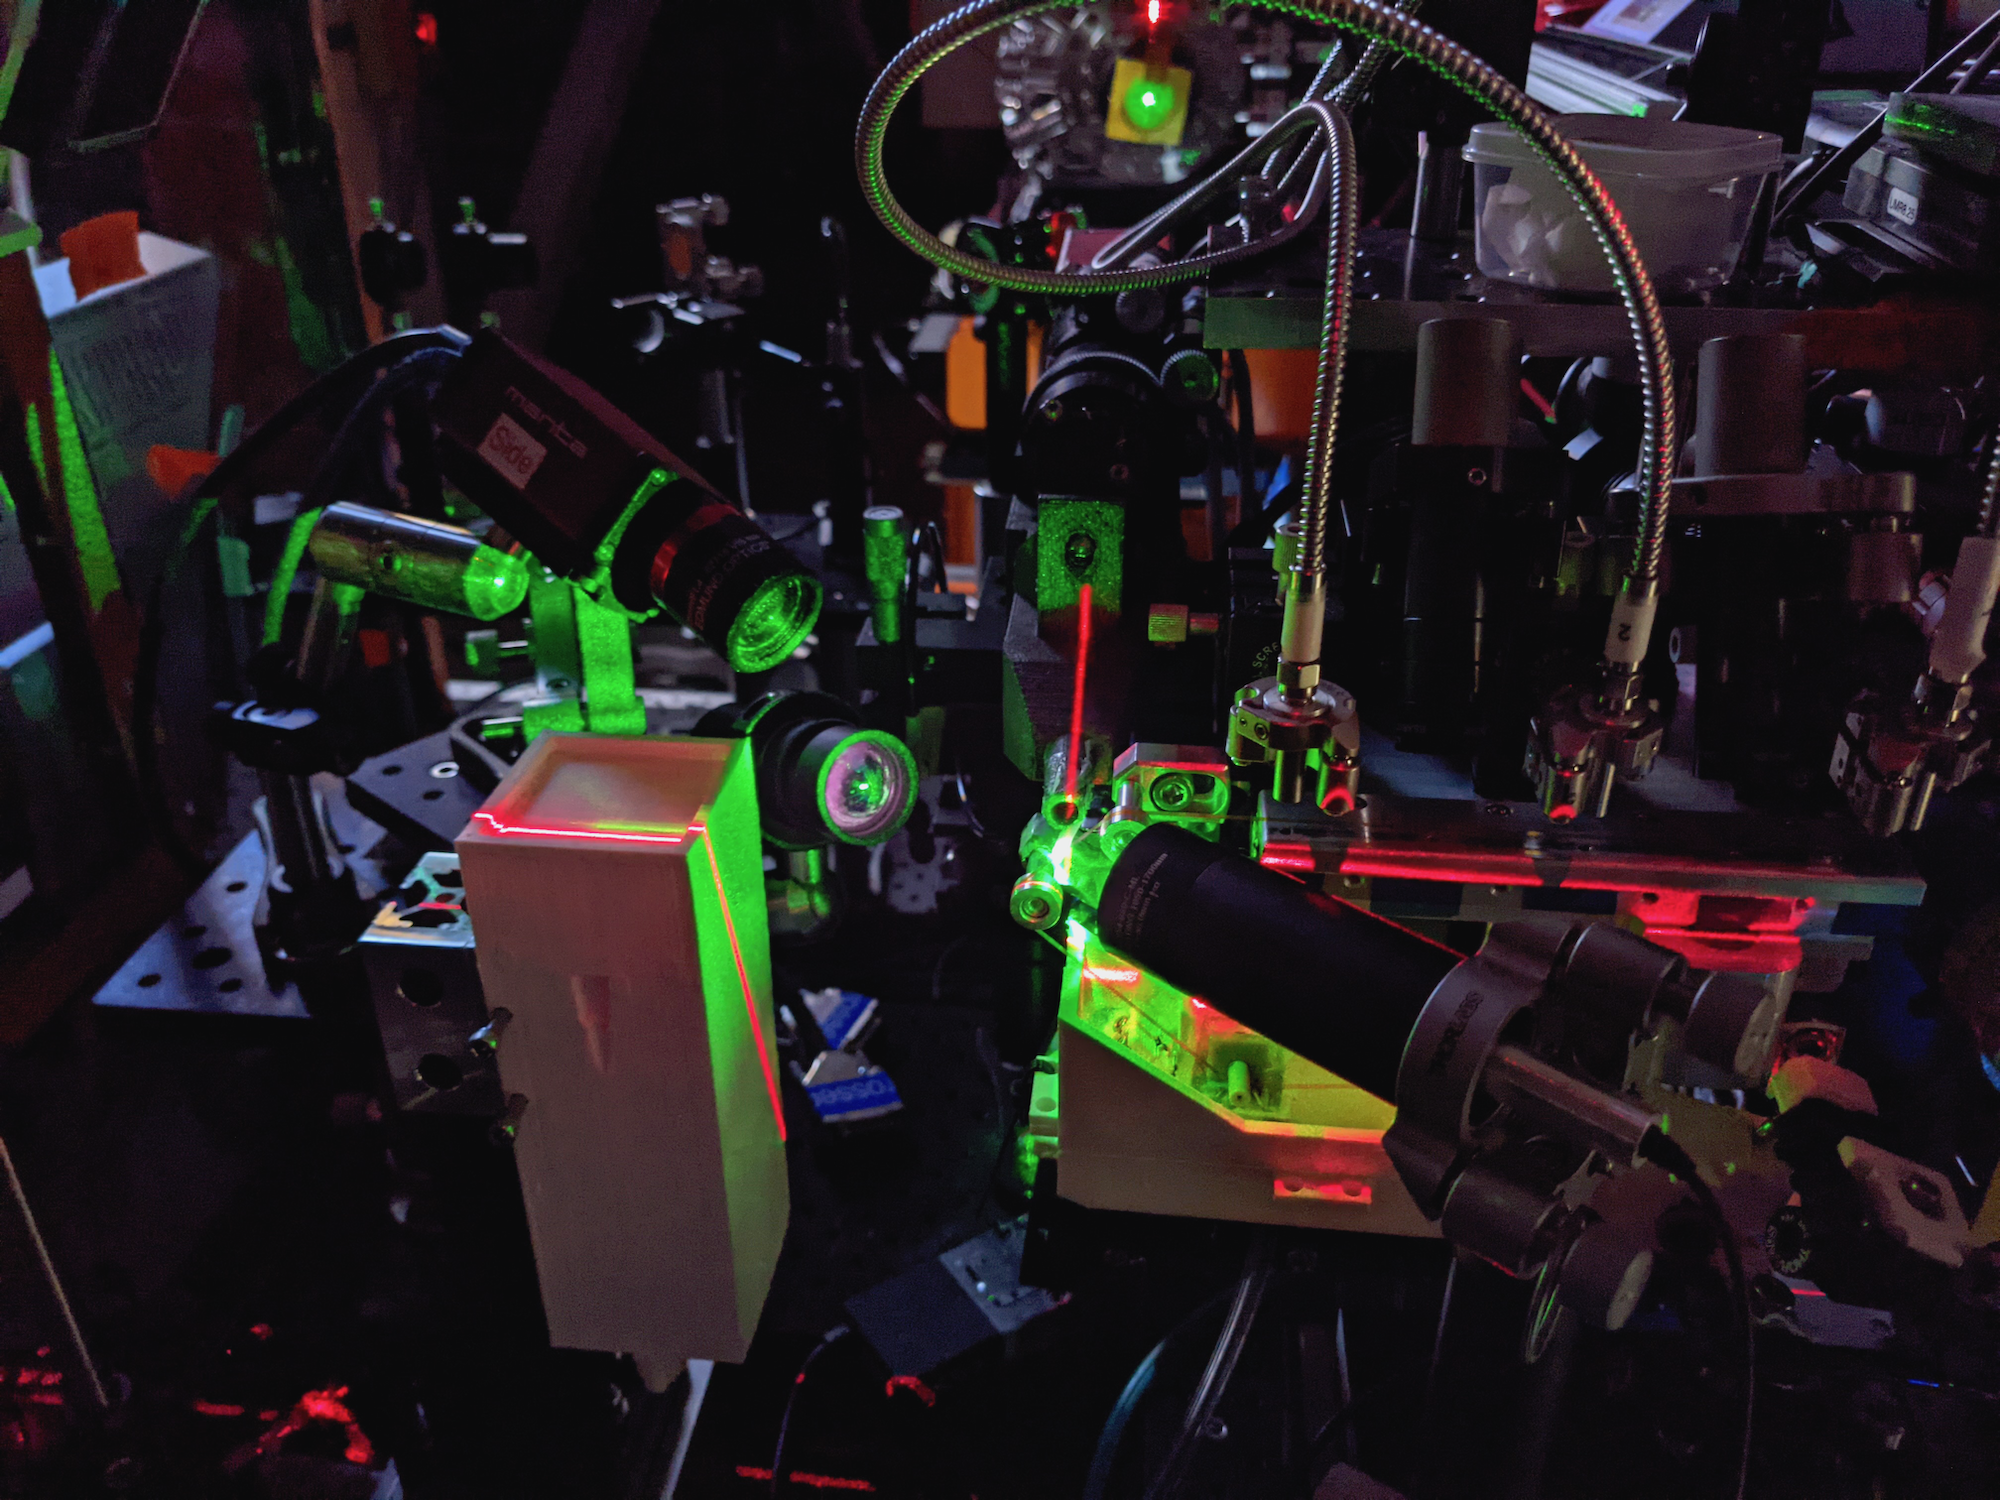 Image of X-ray free-electron laser equipment